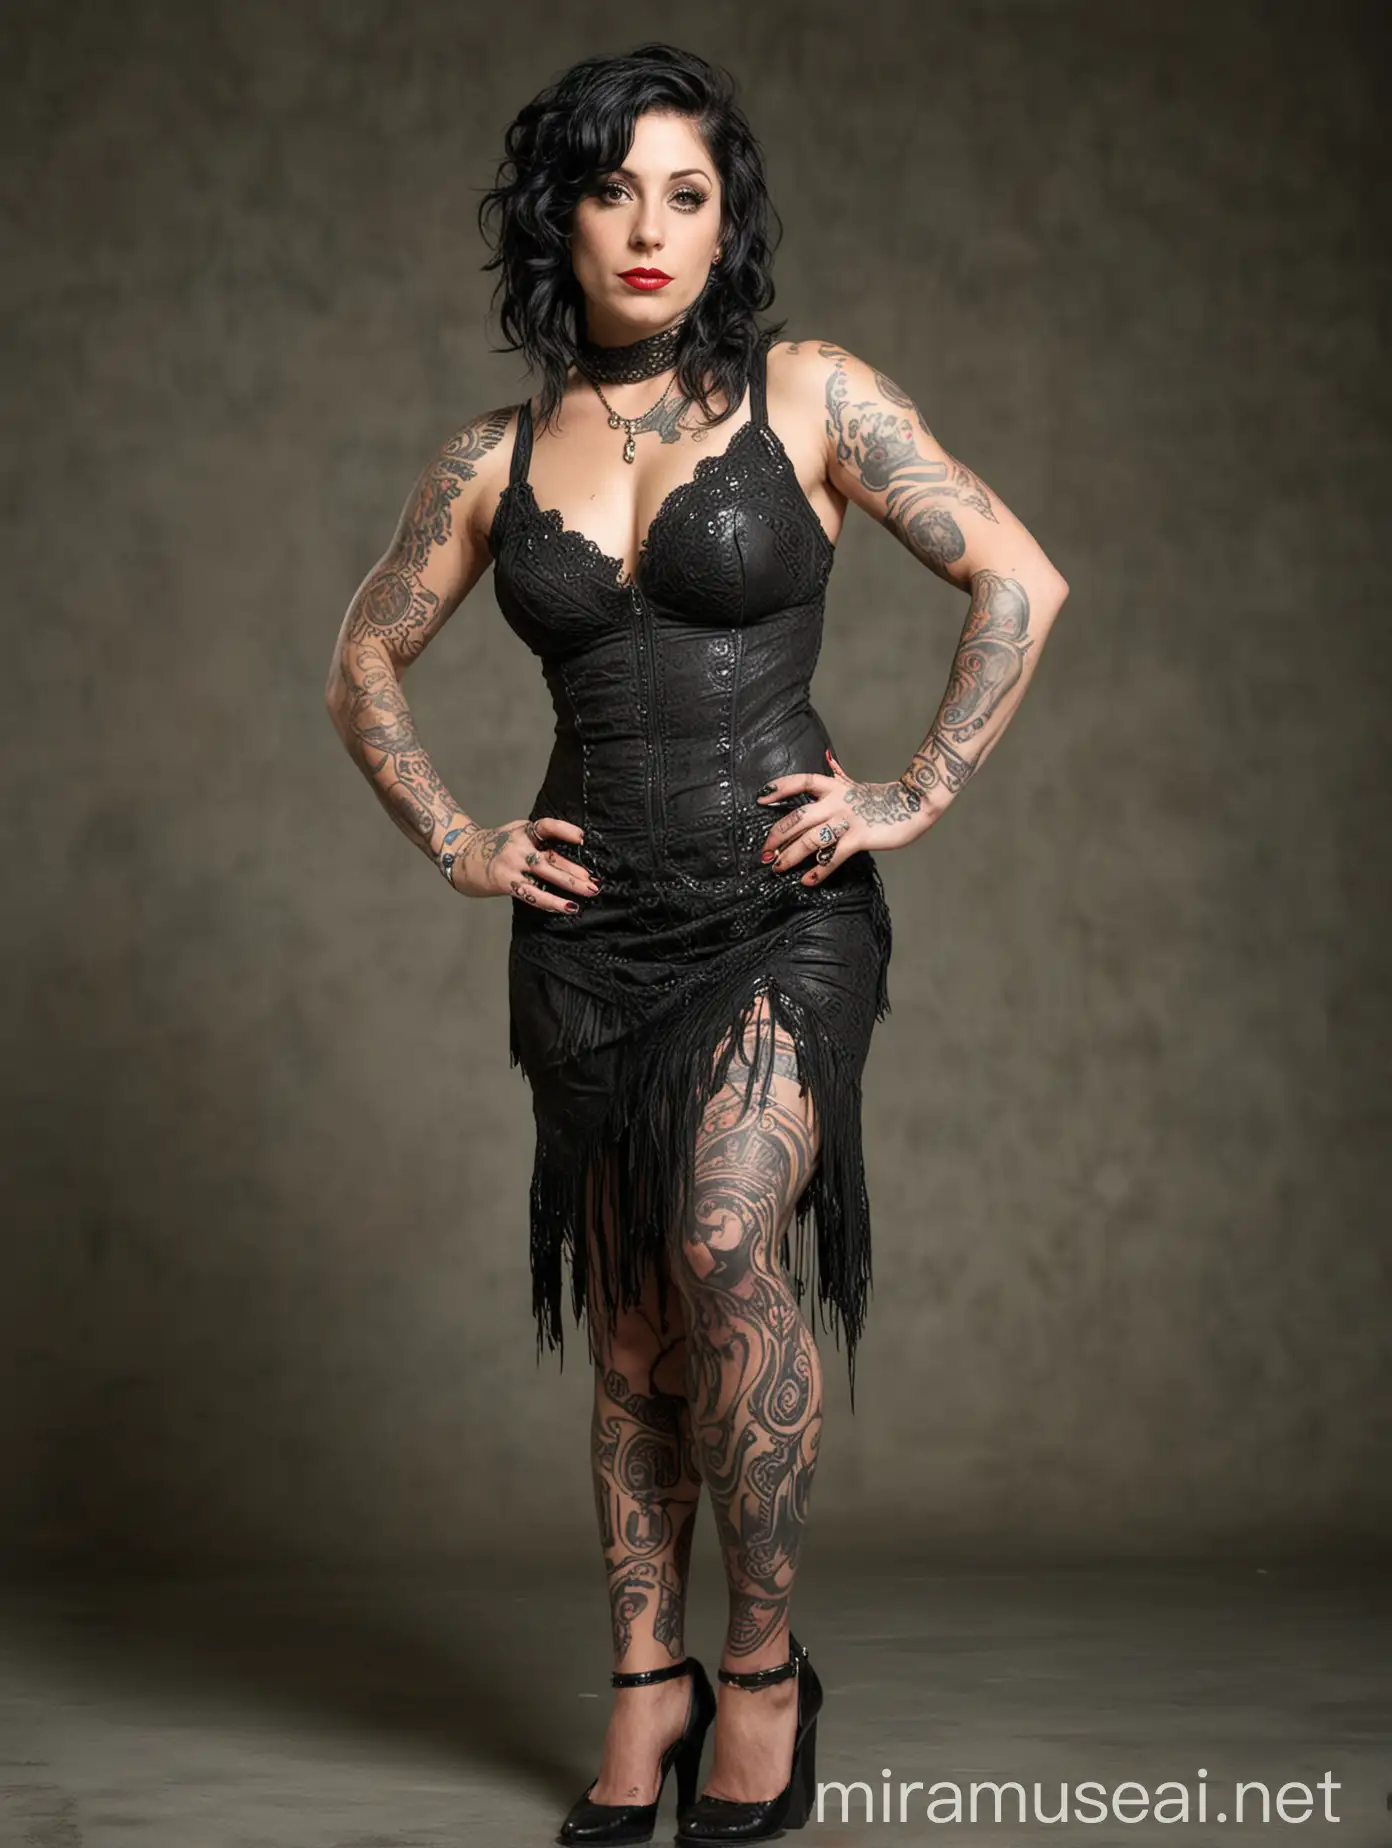 Danielle Colby-Cushman at 30 years old, full length and posing.